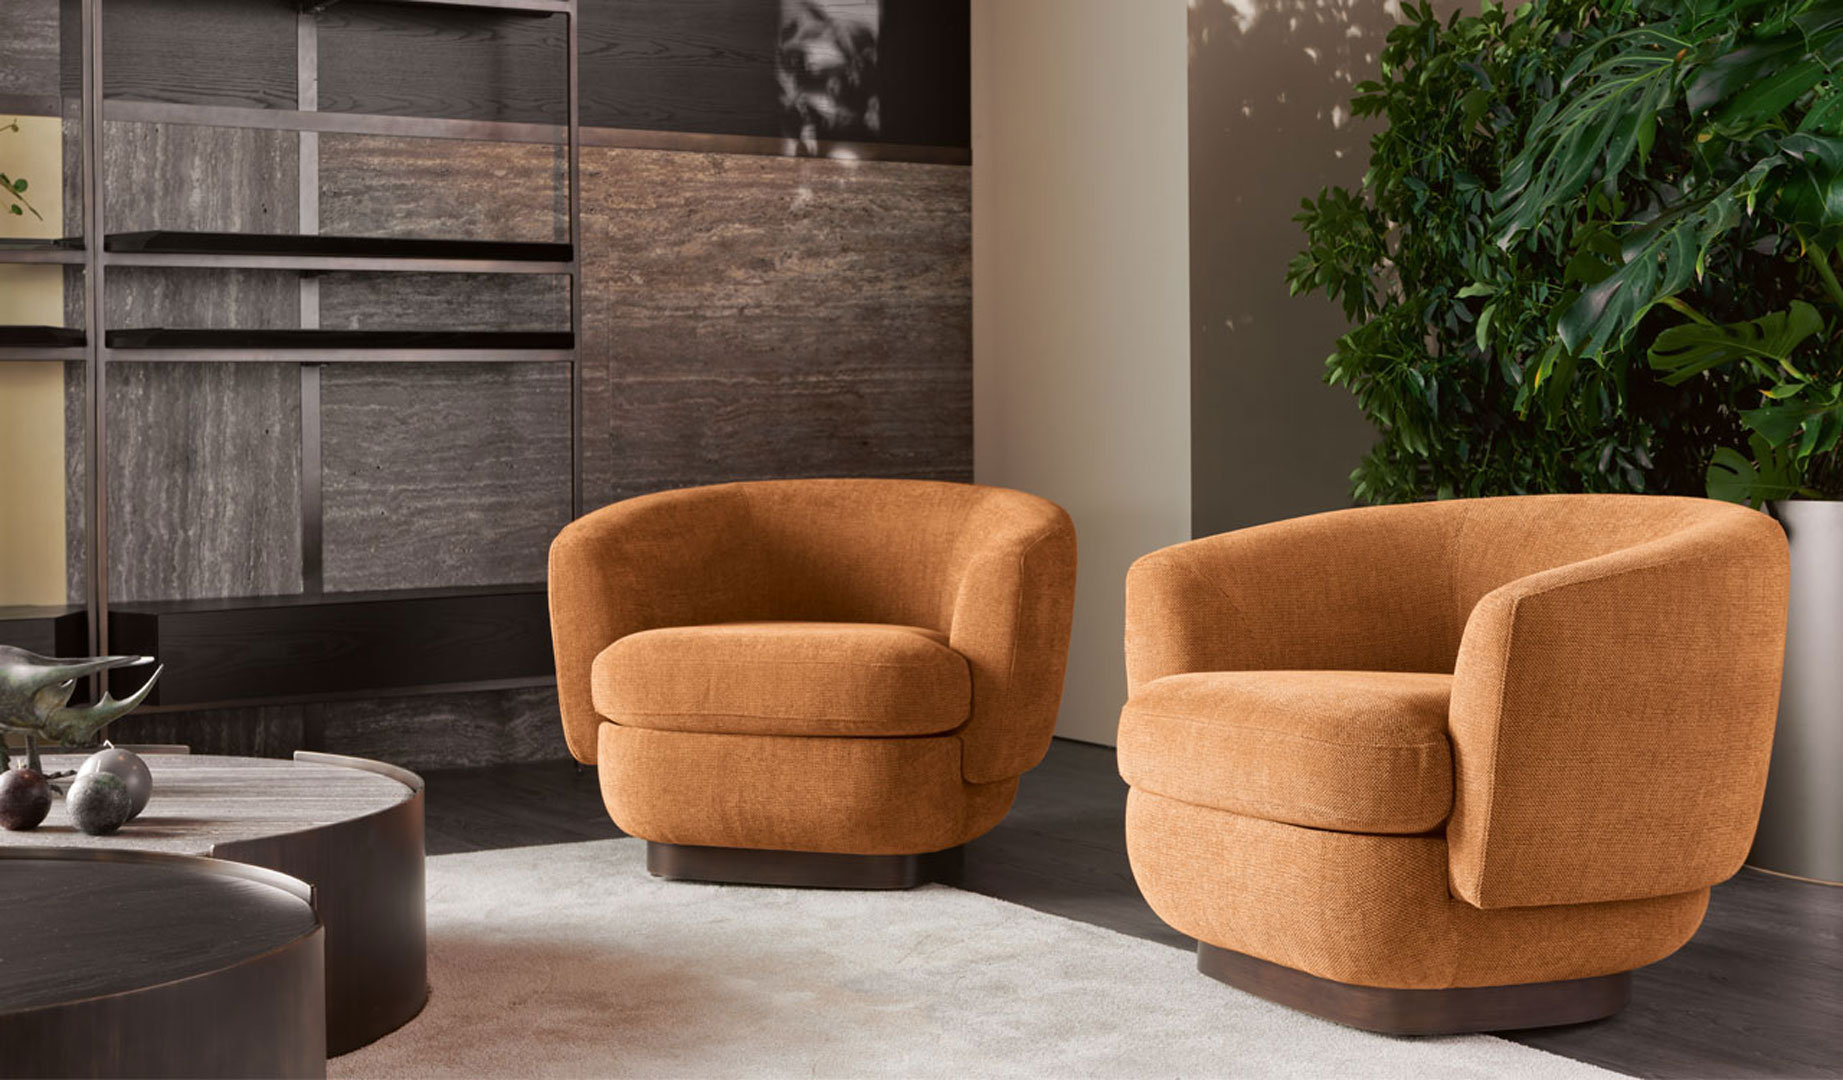 The Cantori armchairs: between authenticity and creativity - Cantori